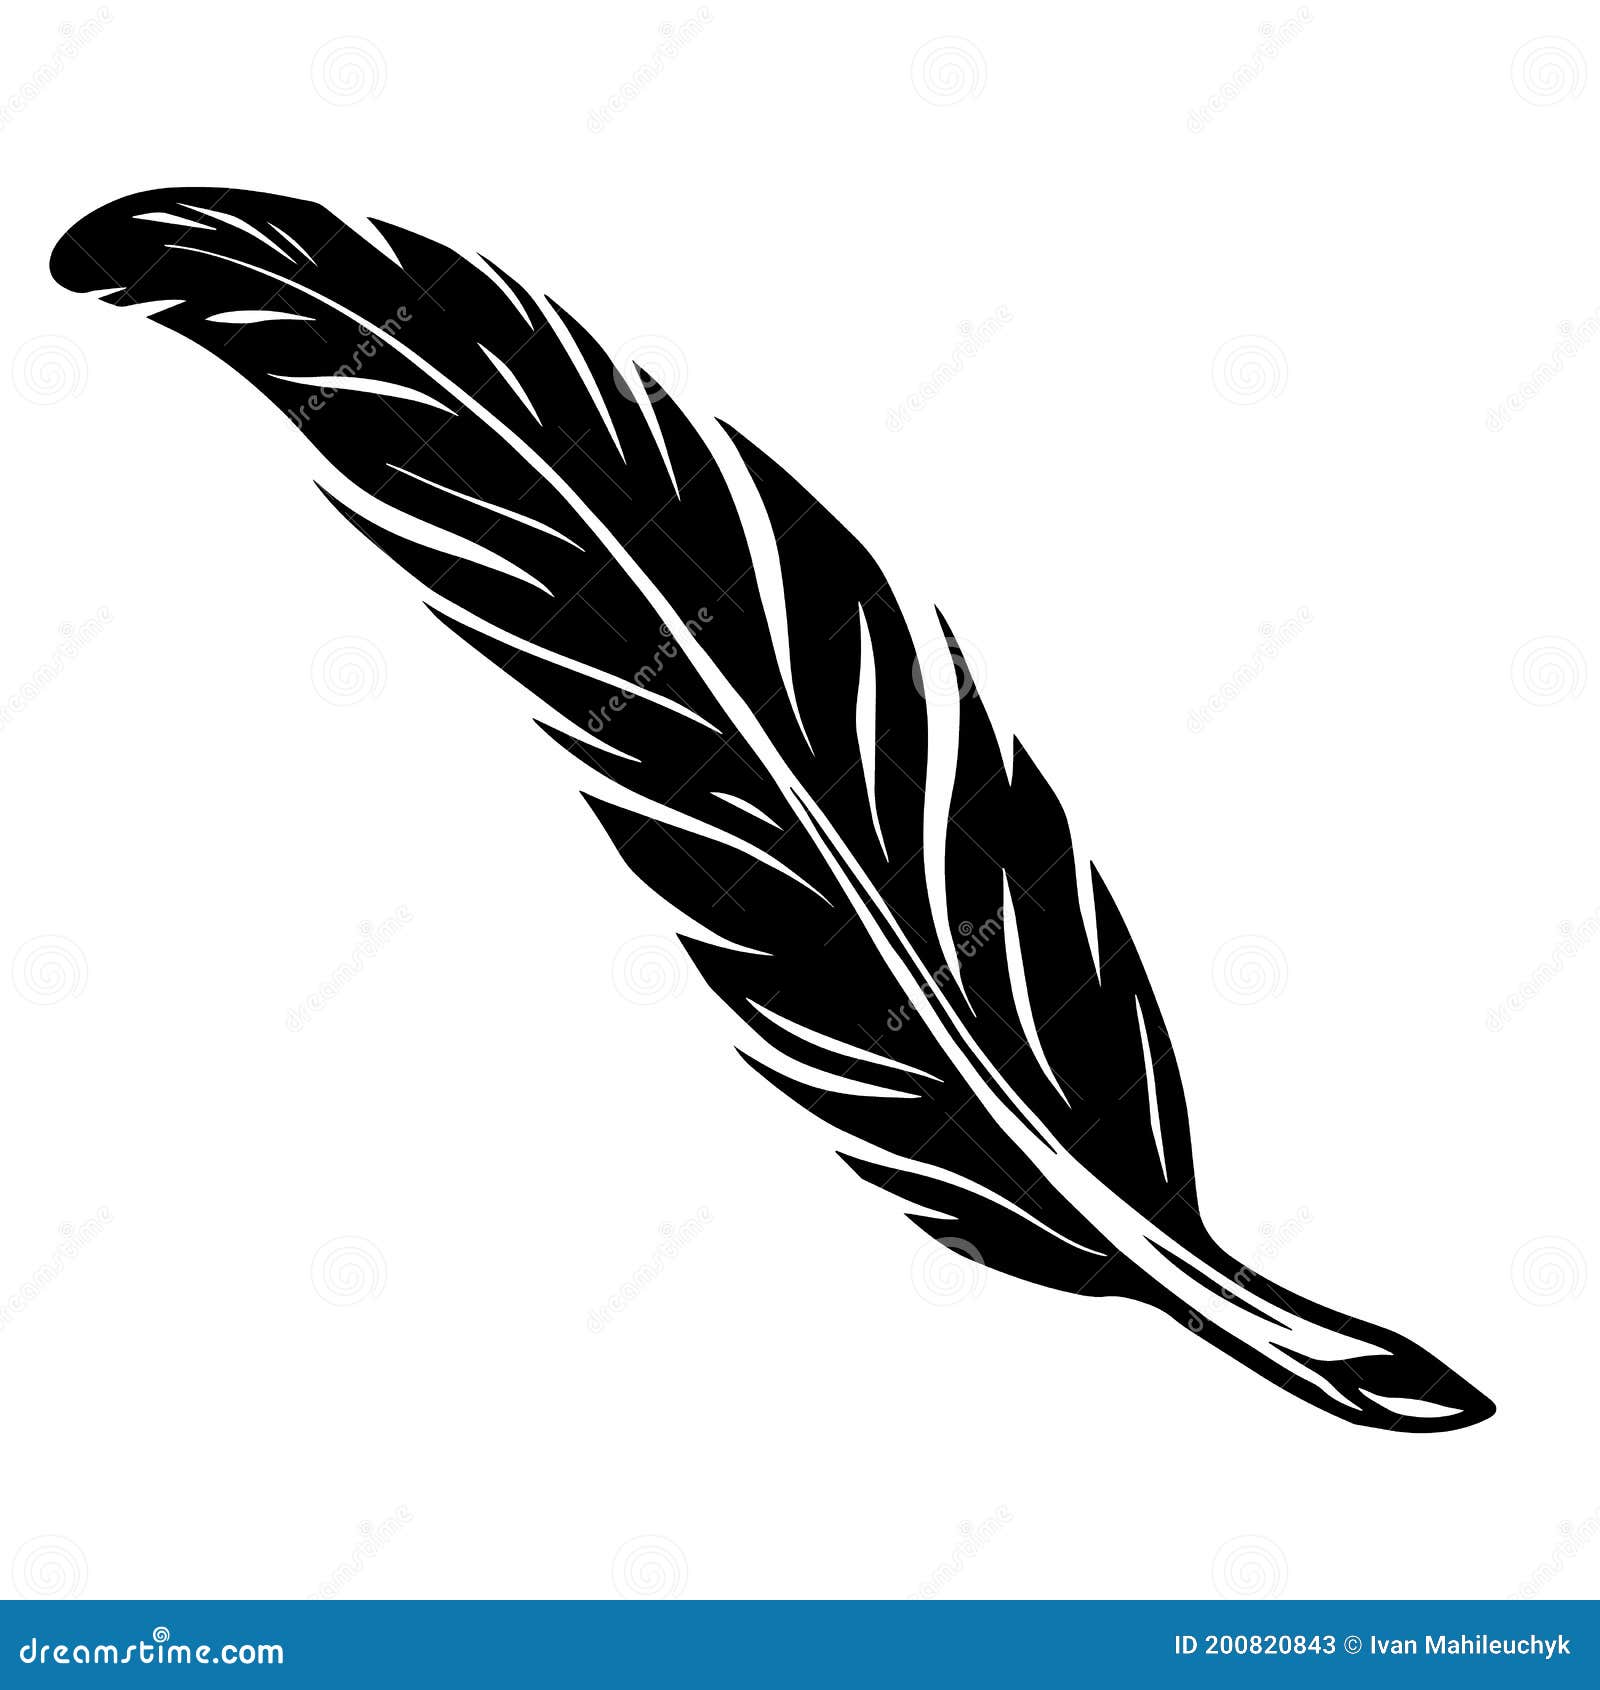 50 Meaningful Tattoo Ideas  Cuded  Feather tattoos Feather tattoo  design Feather tattoo